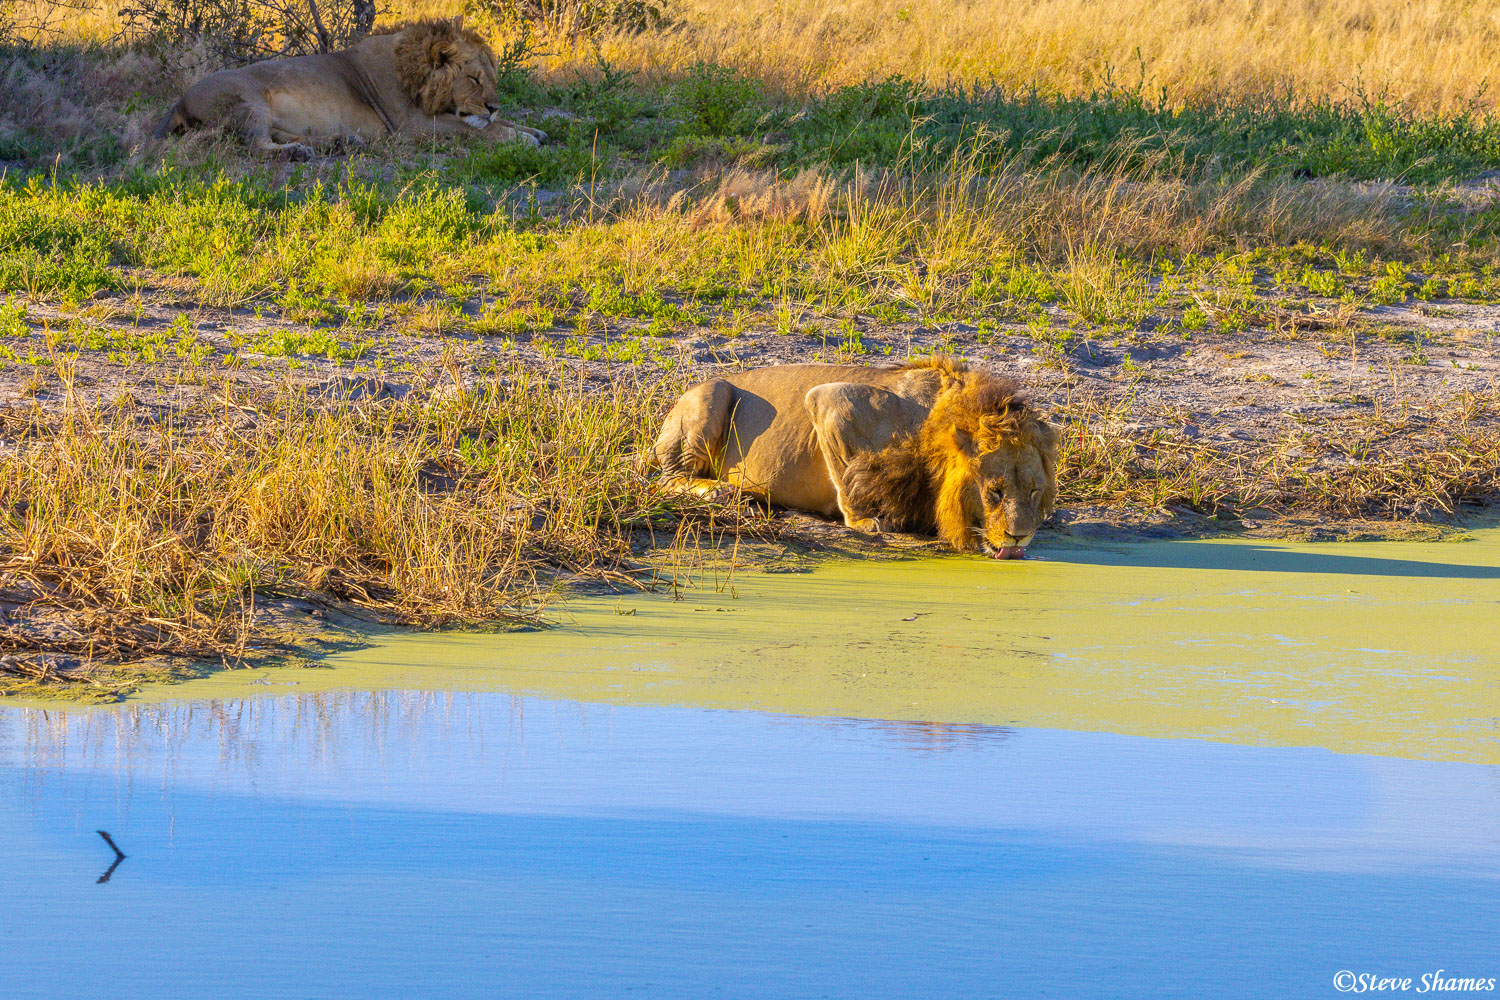 A big lion drinking from a green pond. Should he walk 10 feet to his right to drink from the blue water? Nah, not worth the trouble...